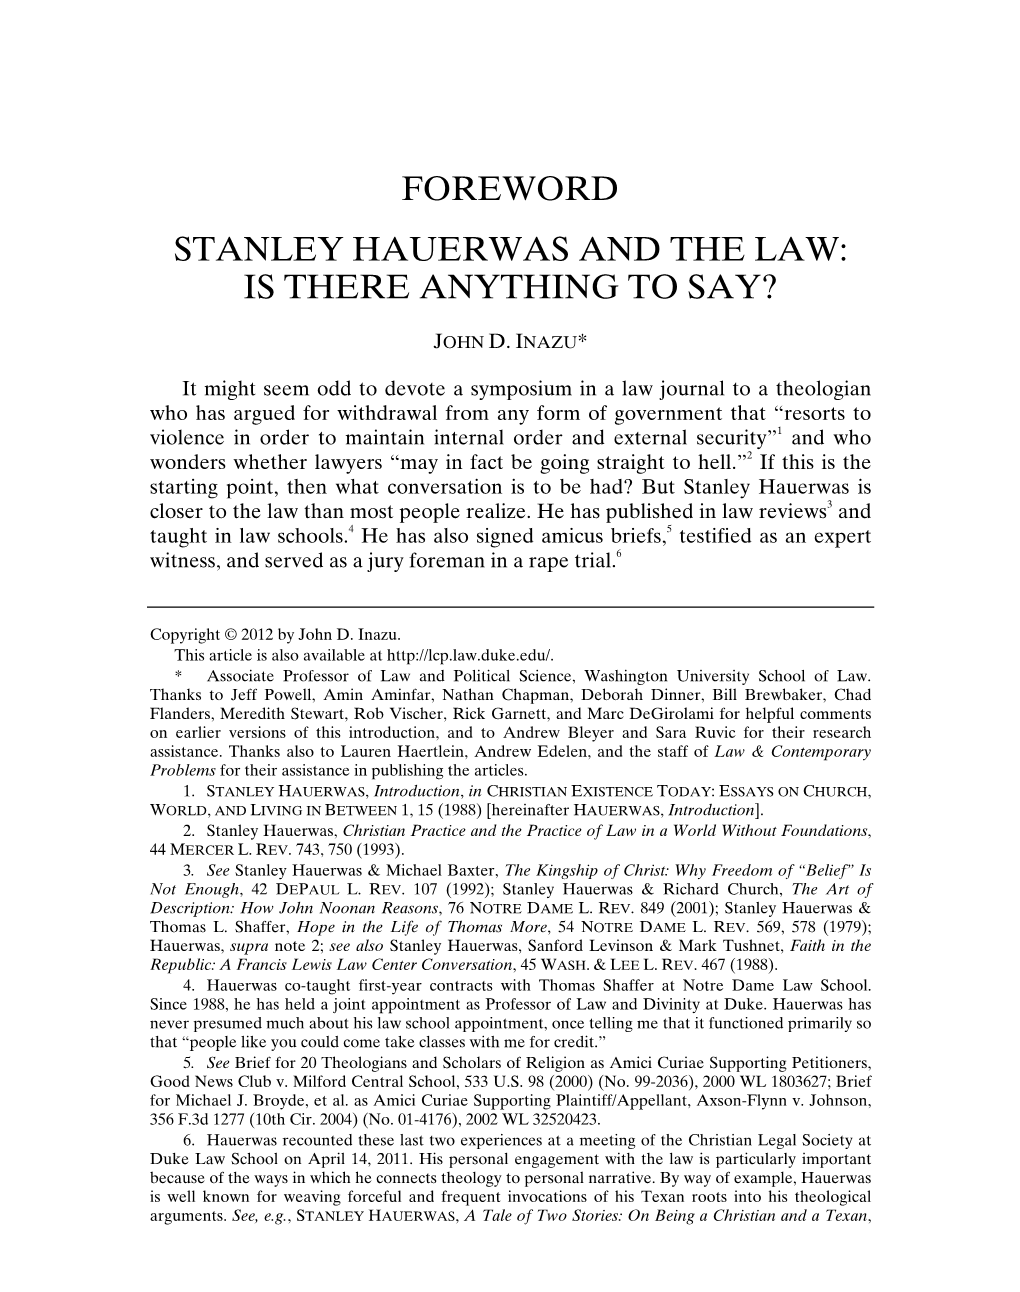 Foreword Stanley Hauerwas and the Law: Is There Anything to Say?